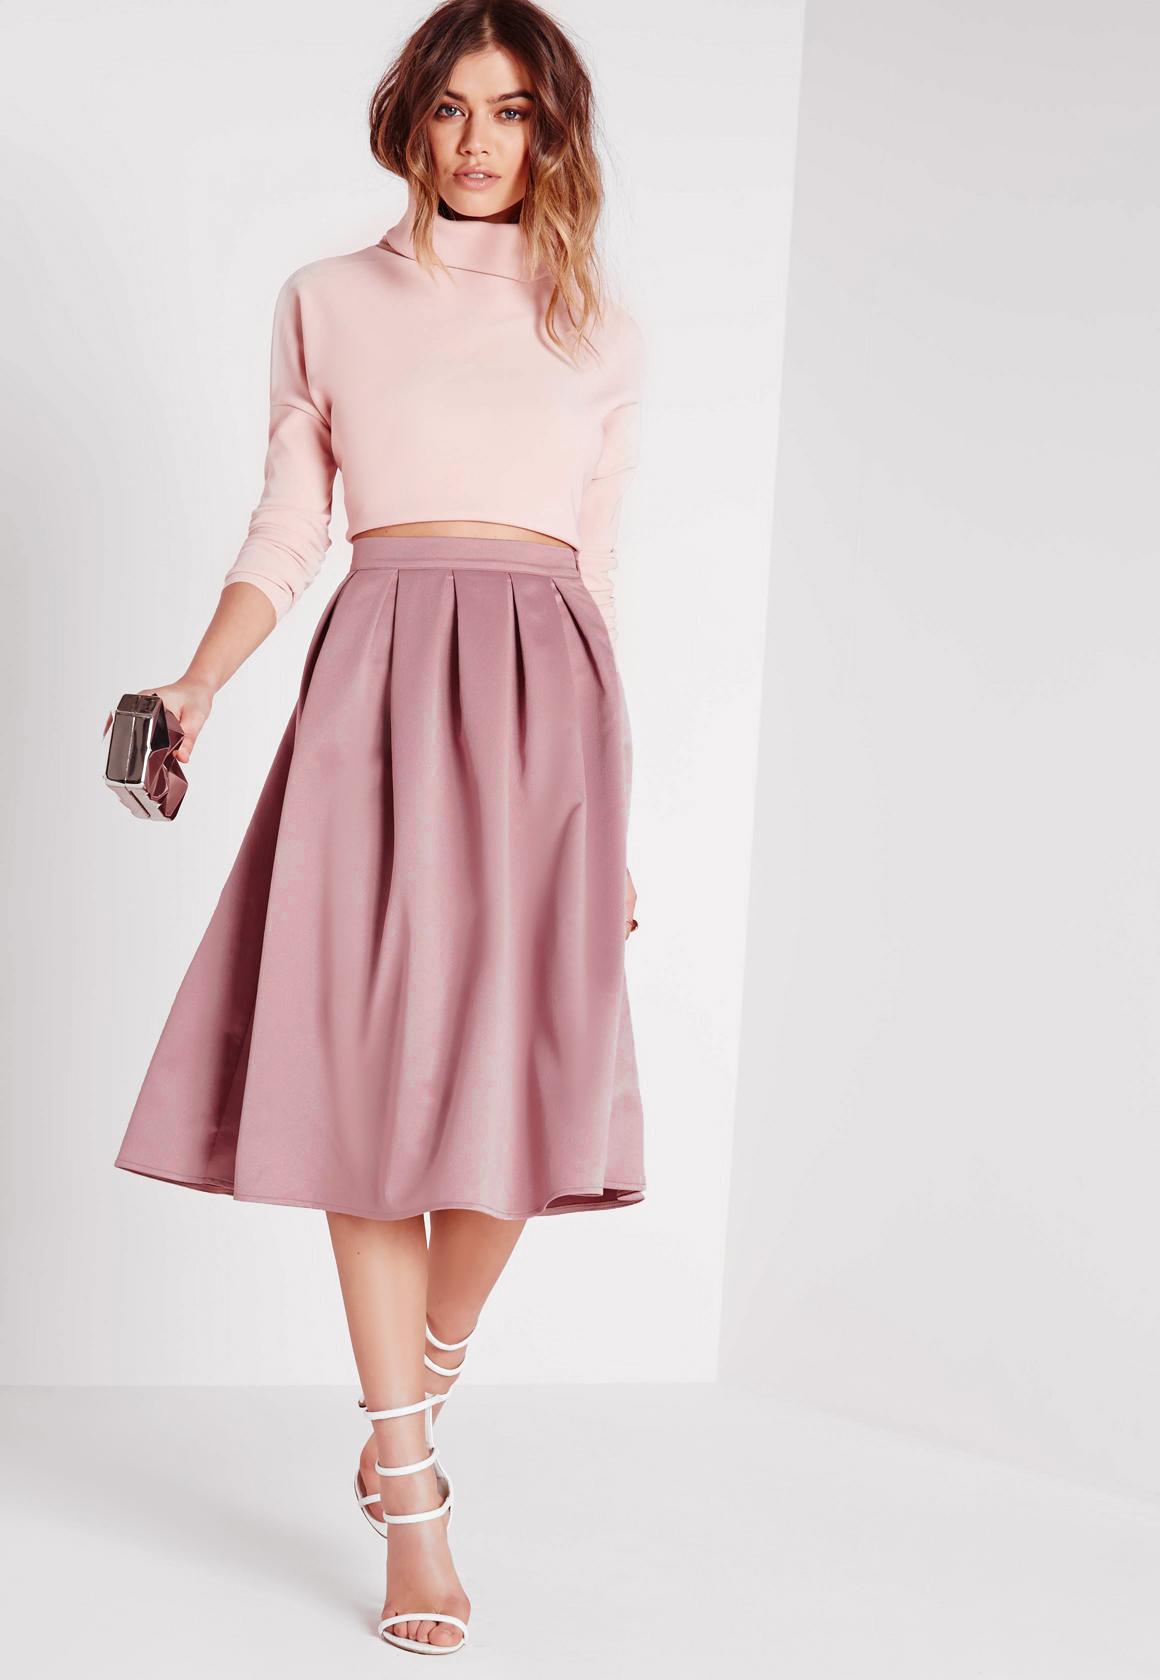 Get a pink skirt for your wardrobe